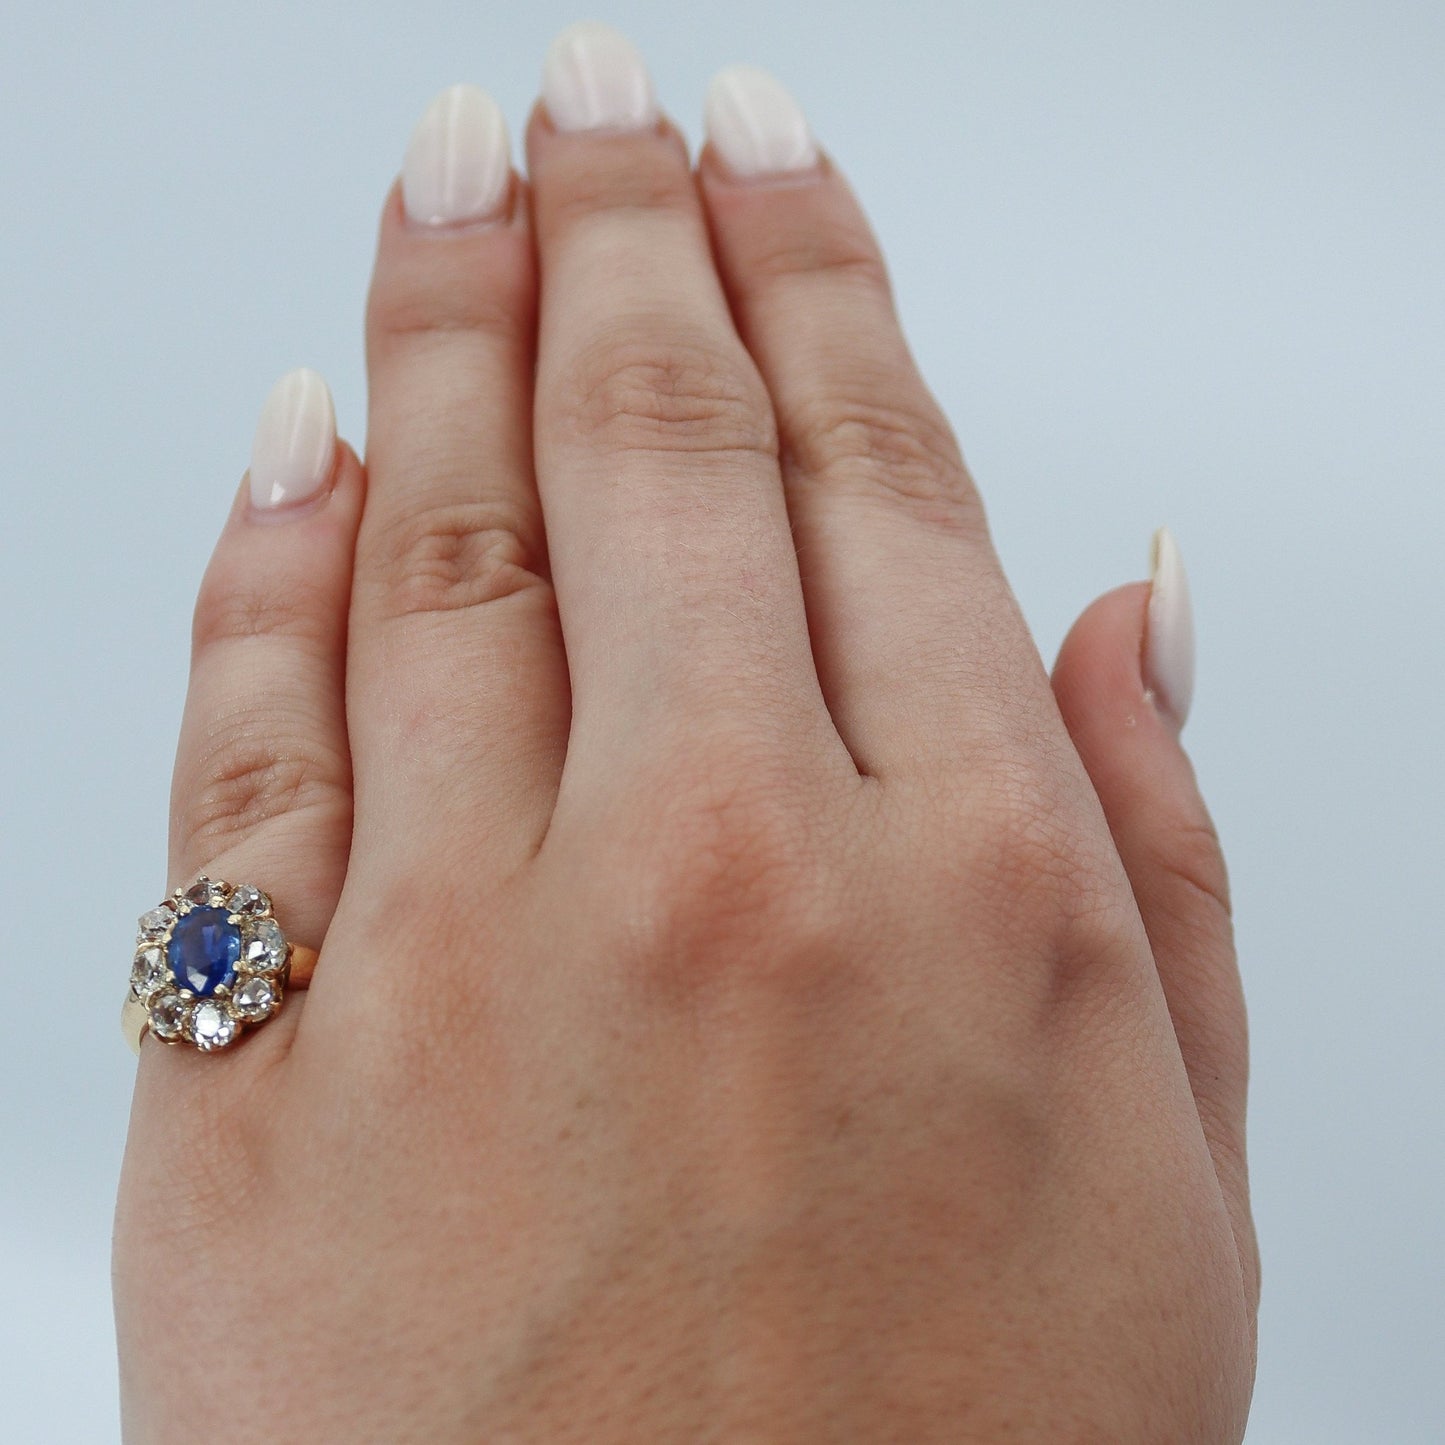 Lovely Art Deco 18 carat Gold 1 Carat Sapphire and Diamond Cluster Ring - Friar House